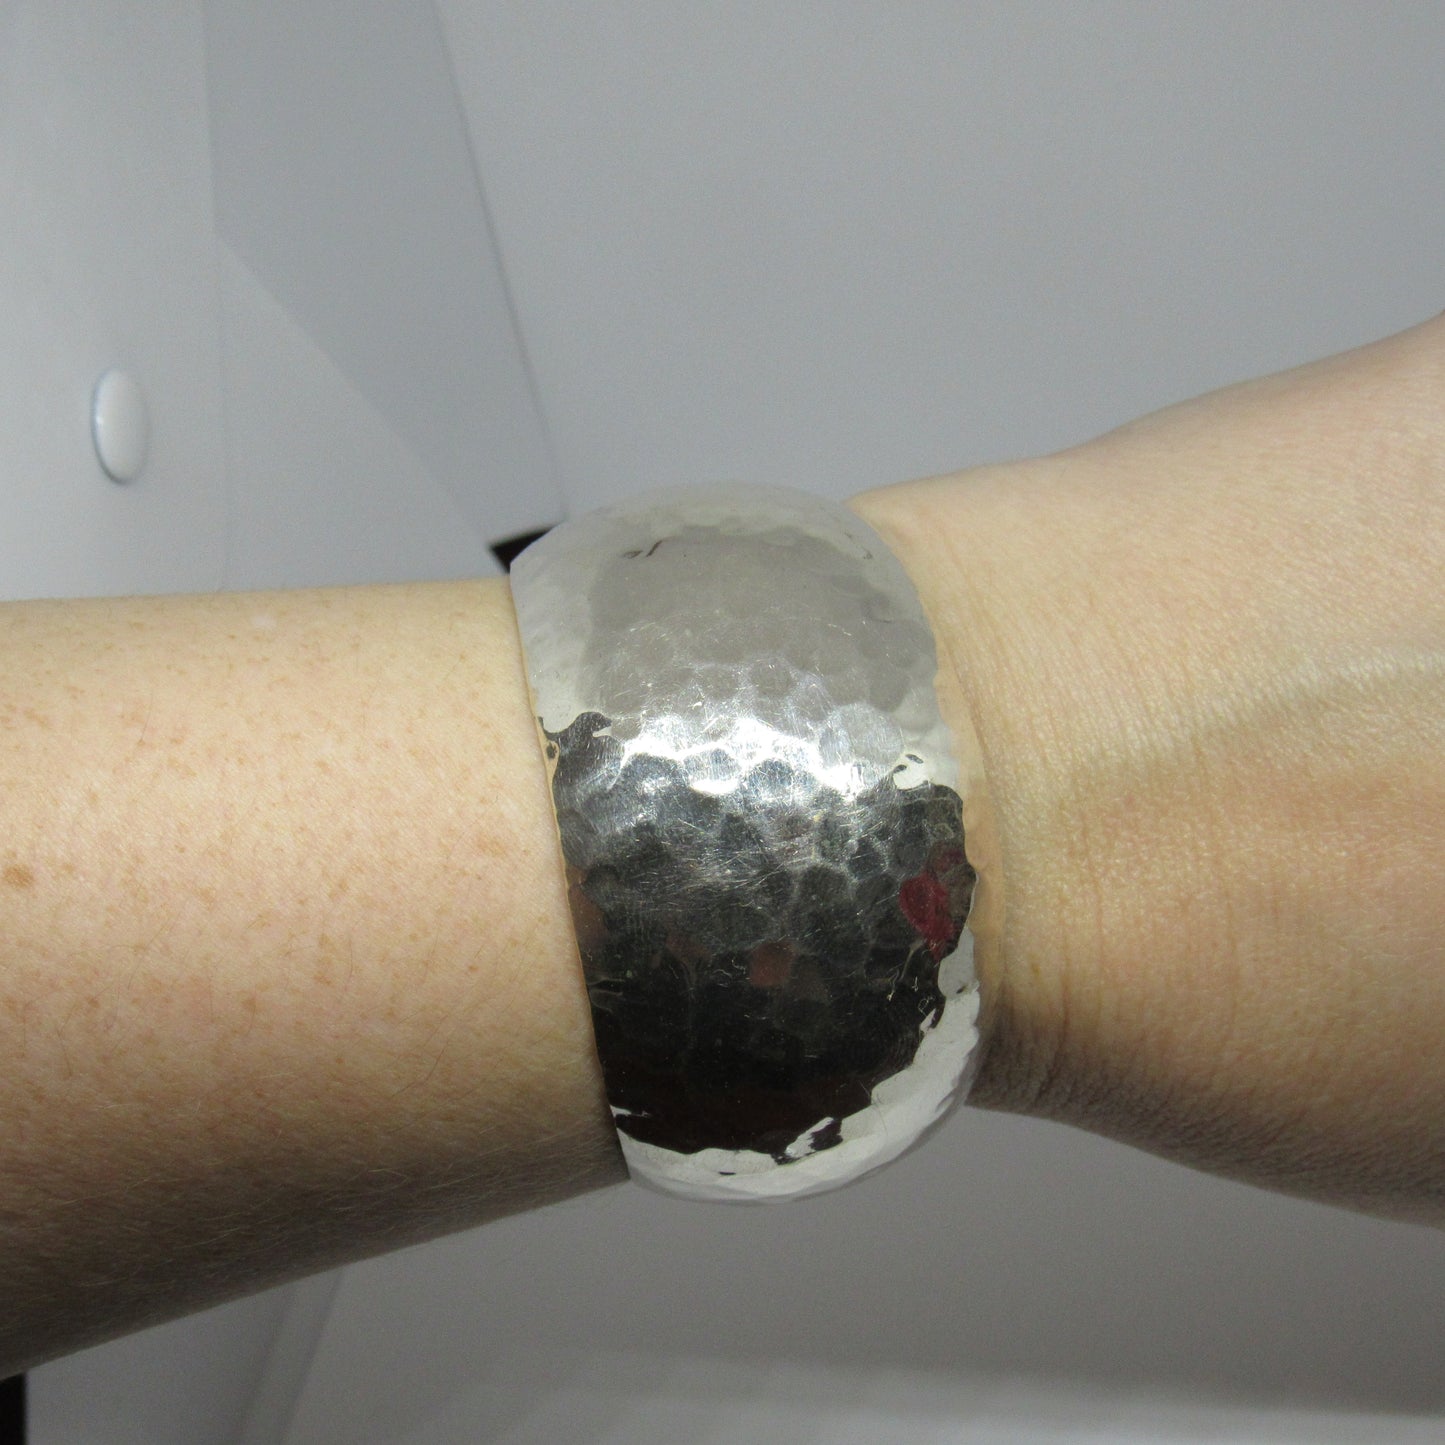 Vintage Mexico TM-179 Sterling Silver 925 Hammered Cuff Bracelet - 7 inch x 1.25 inch